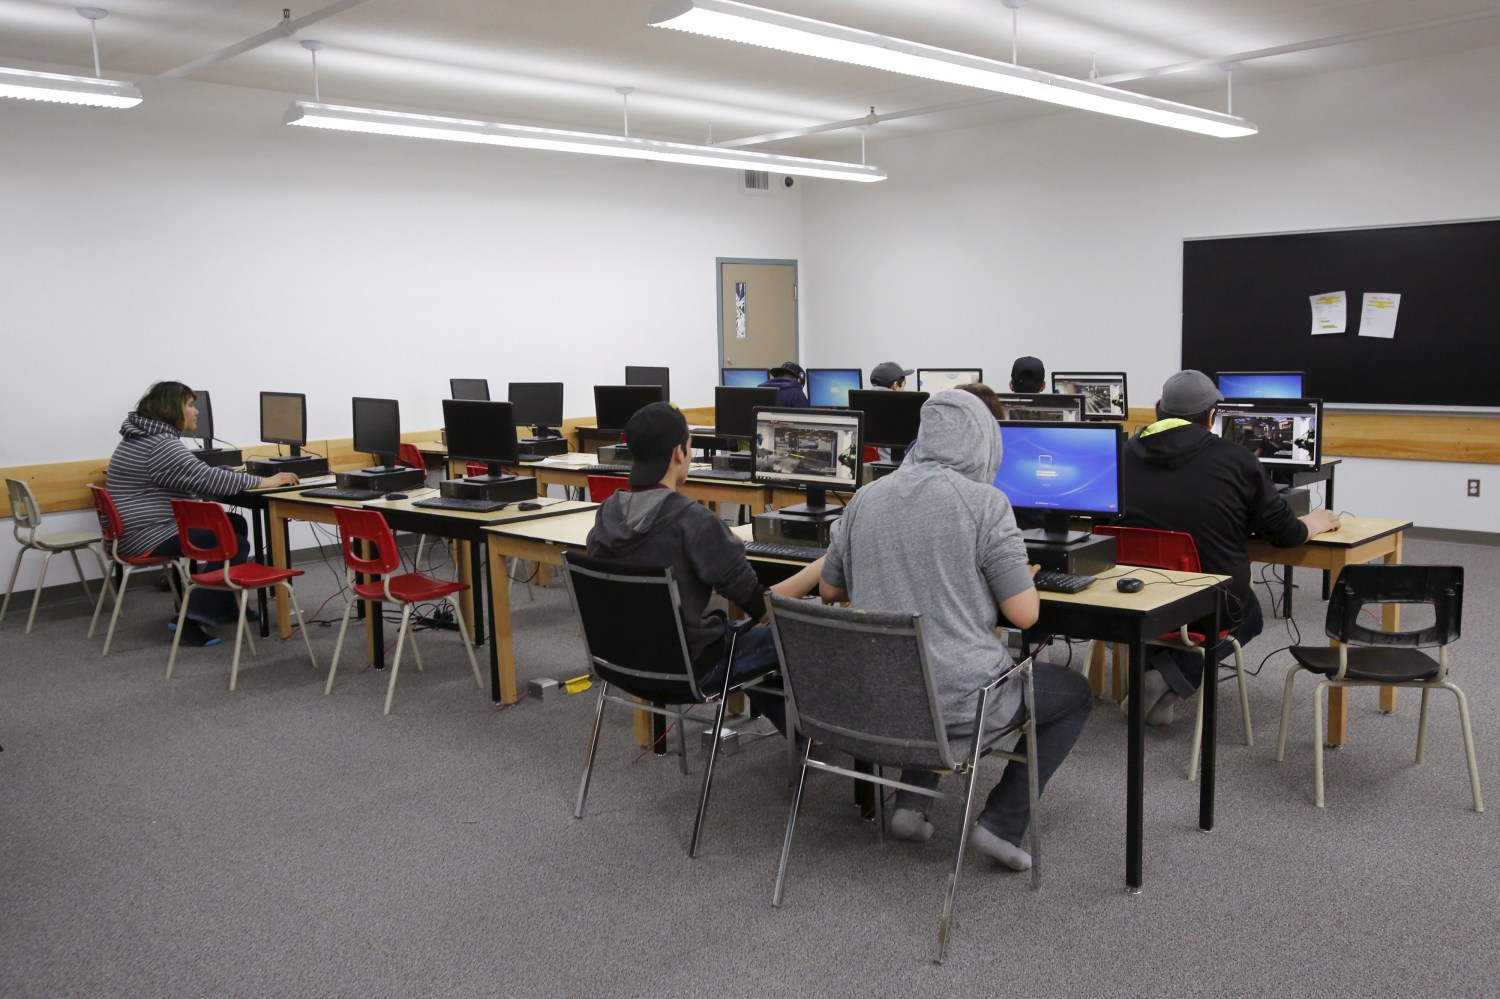 Students use computers at the Vezina Secondary School in the Attawapiskat First Nation in northern Ontario, Canada, April 15, 2016. REUTERS/Chris Wattie - GF10000384122